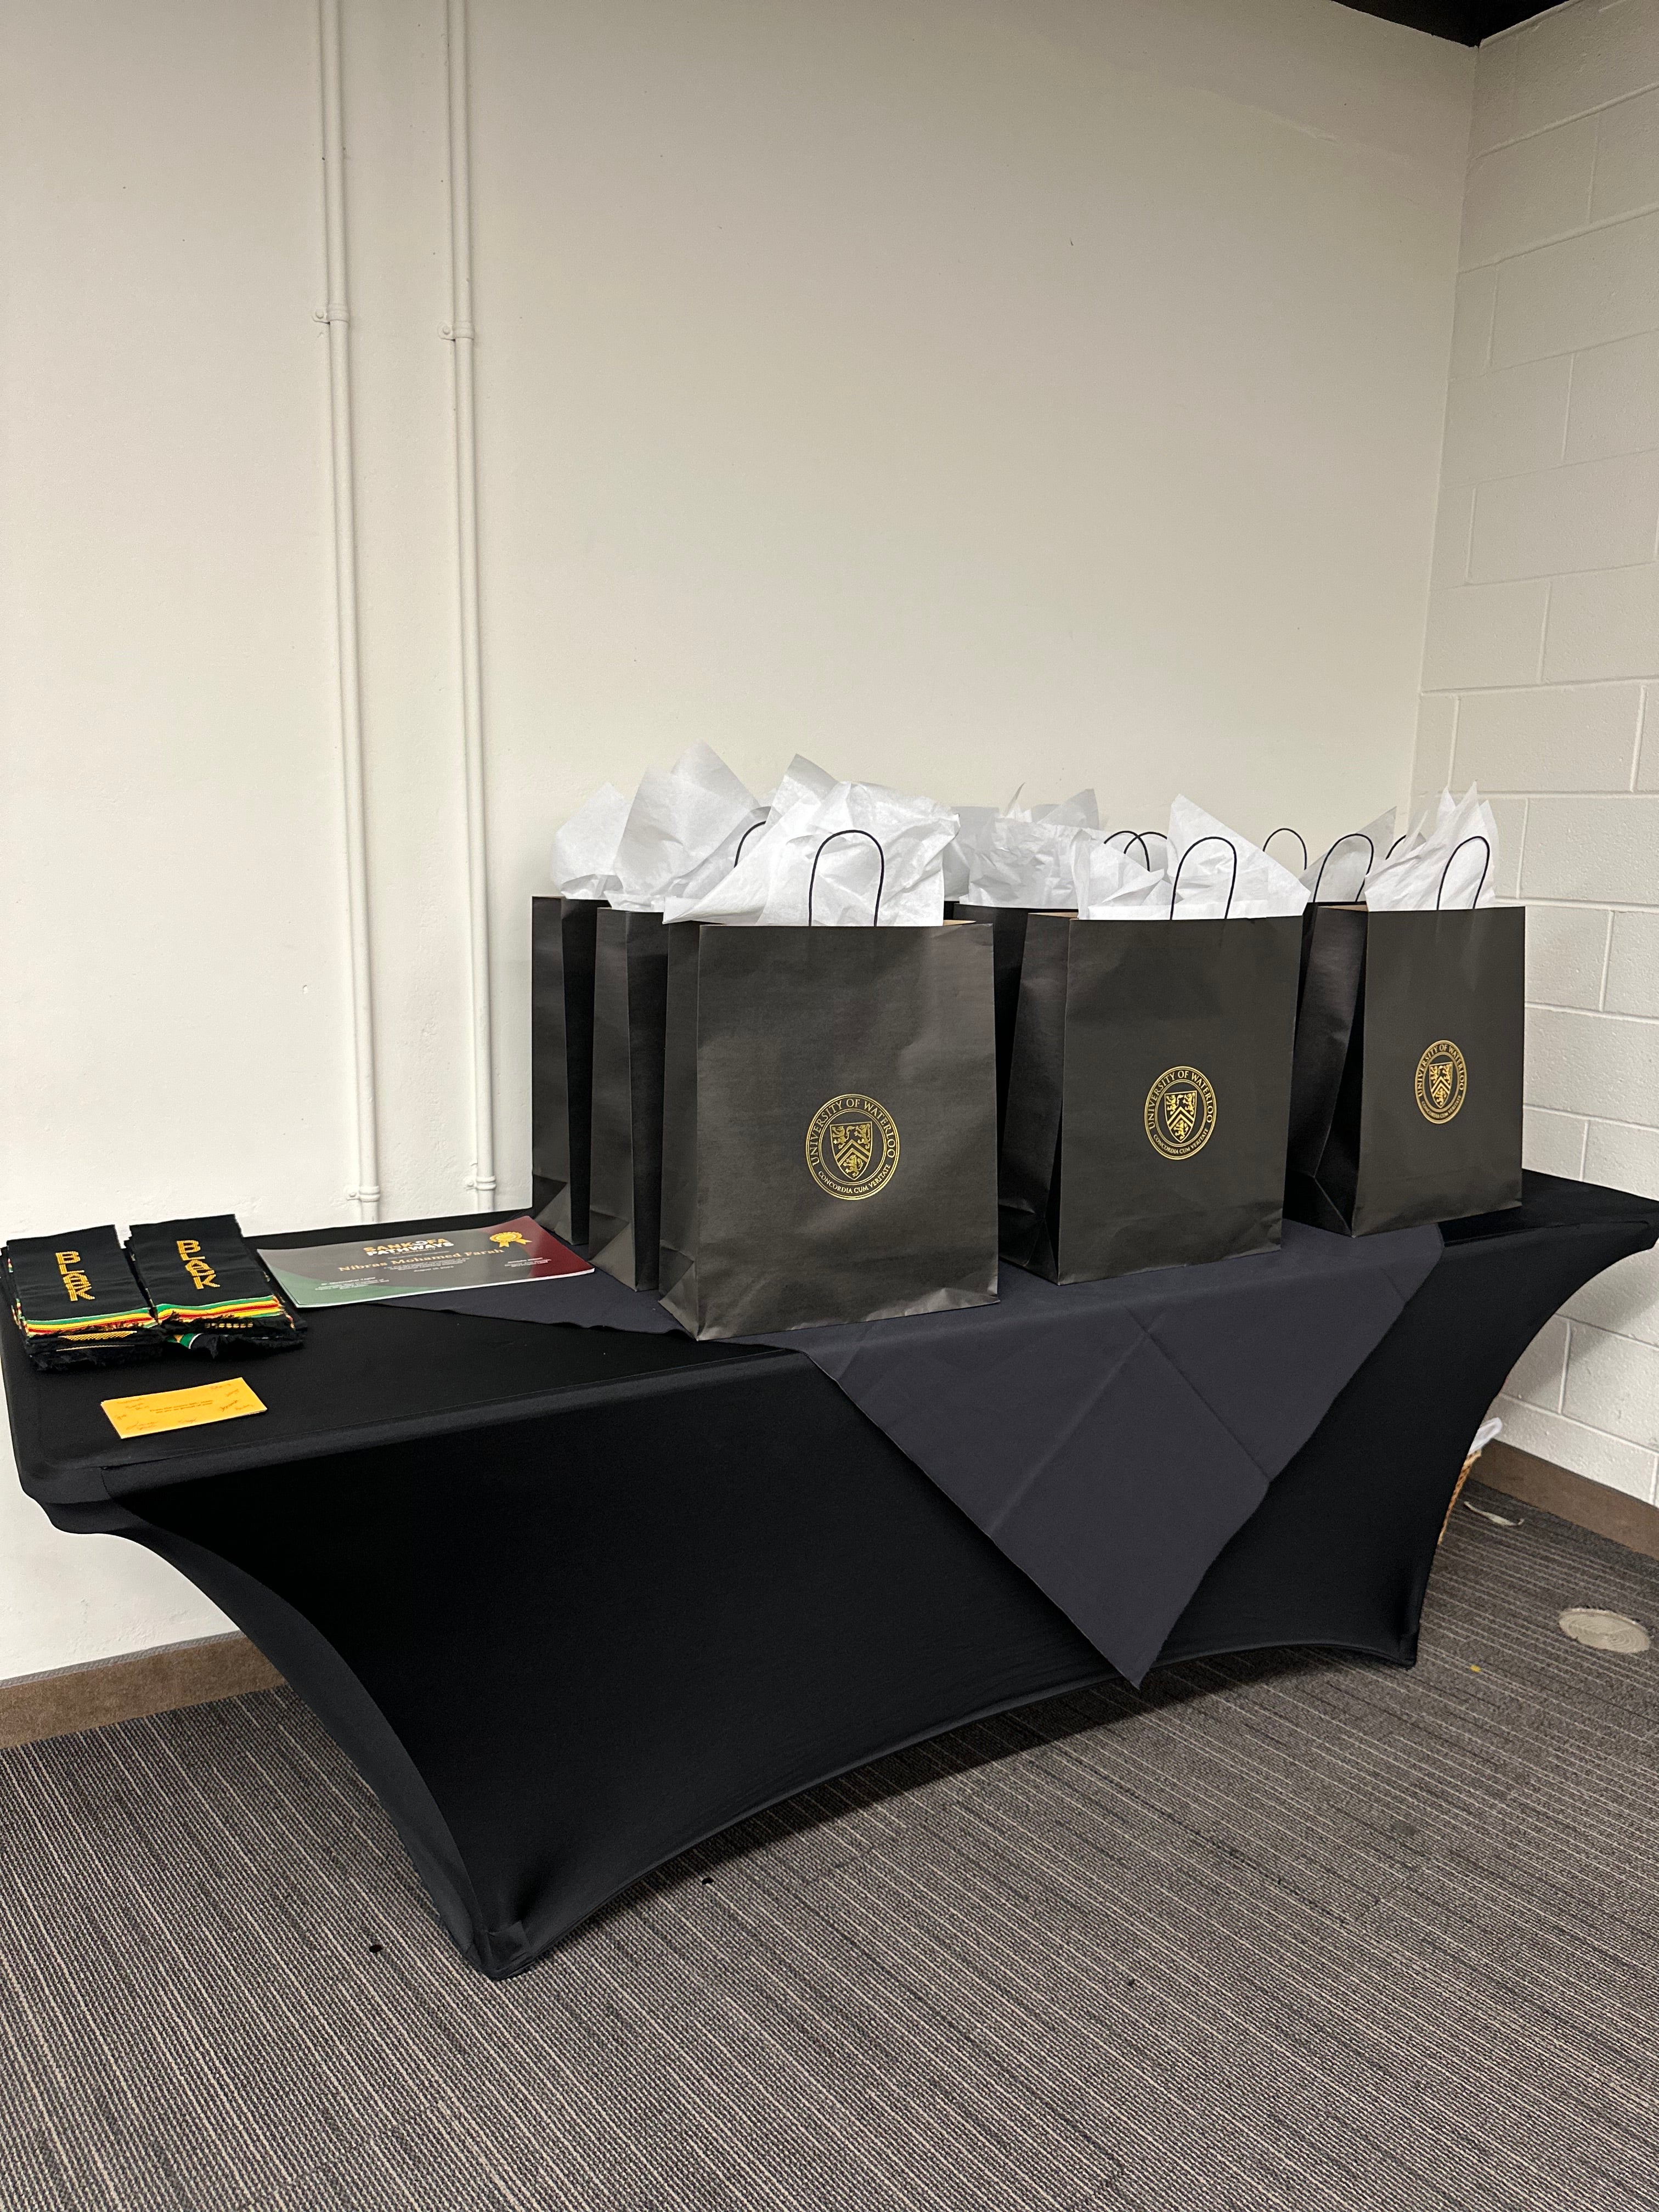 Awards and gift bags